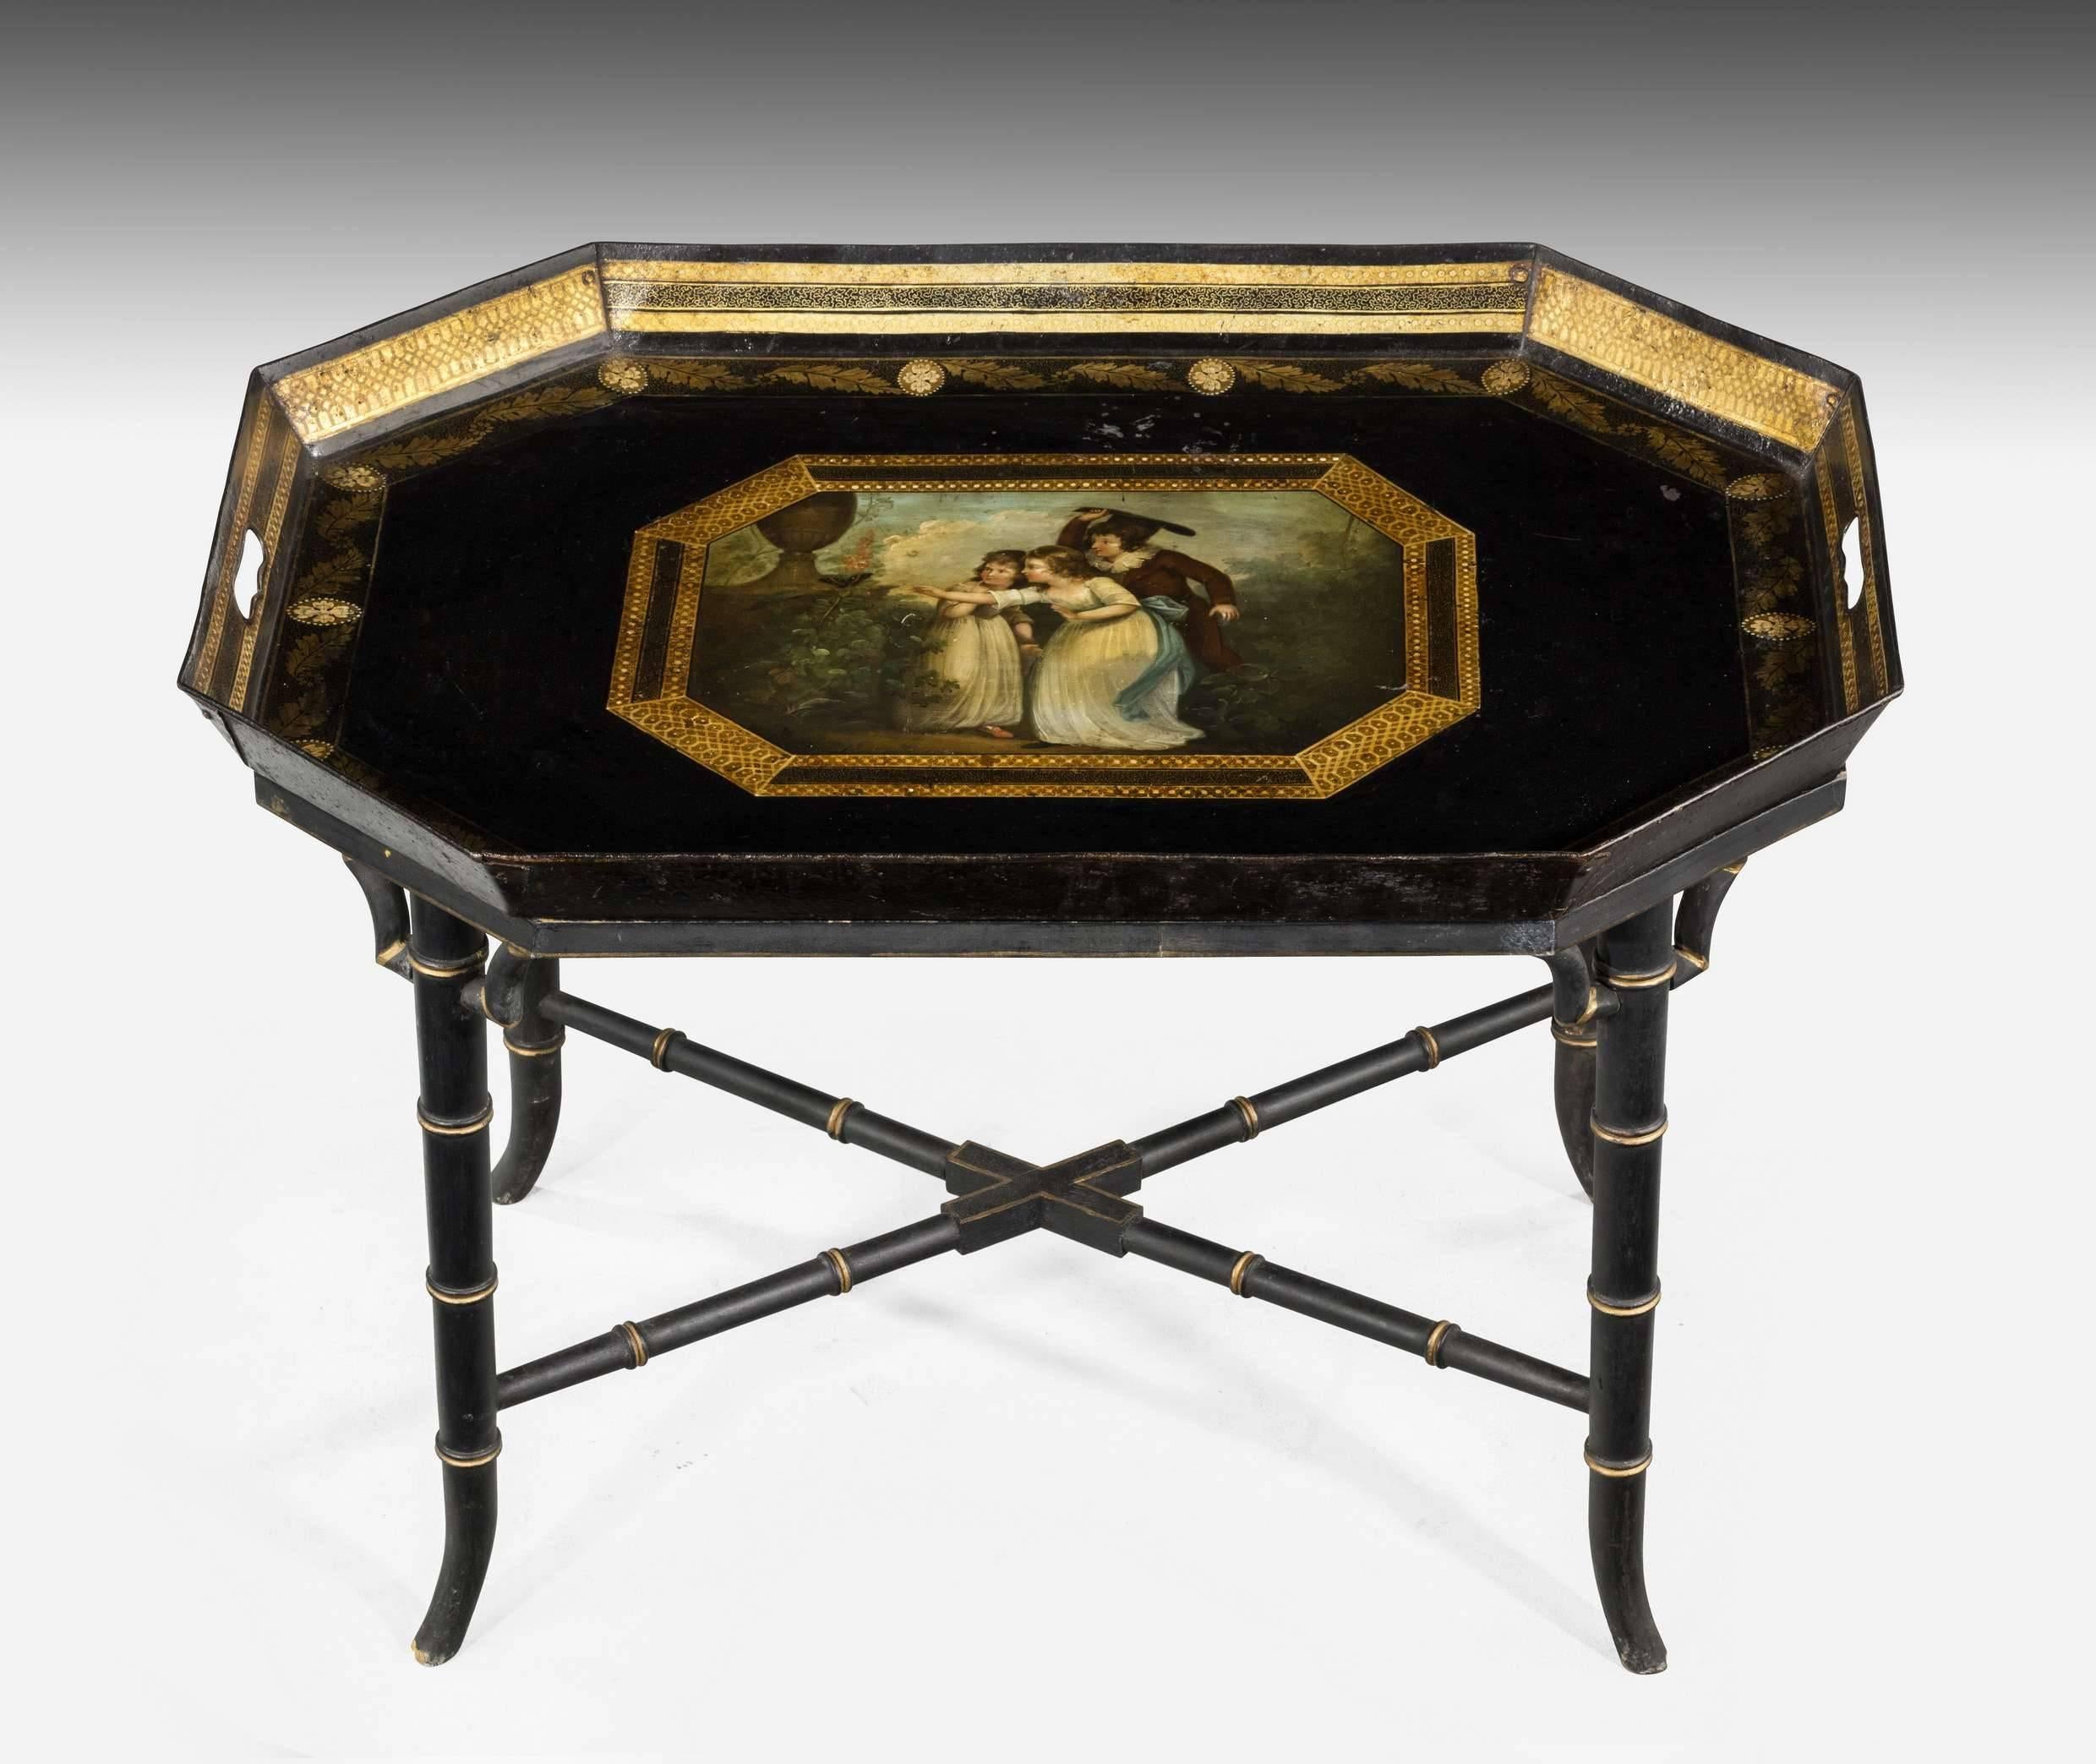 A beautifully painted polychrome tray signed Innocent mischief. On a custom built 20th century Stand. Octagonal shaped with finely decorated leaf and reserve gilded border. The central painting of a youth and two young girls in elegant dresses